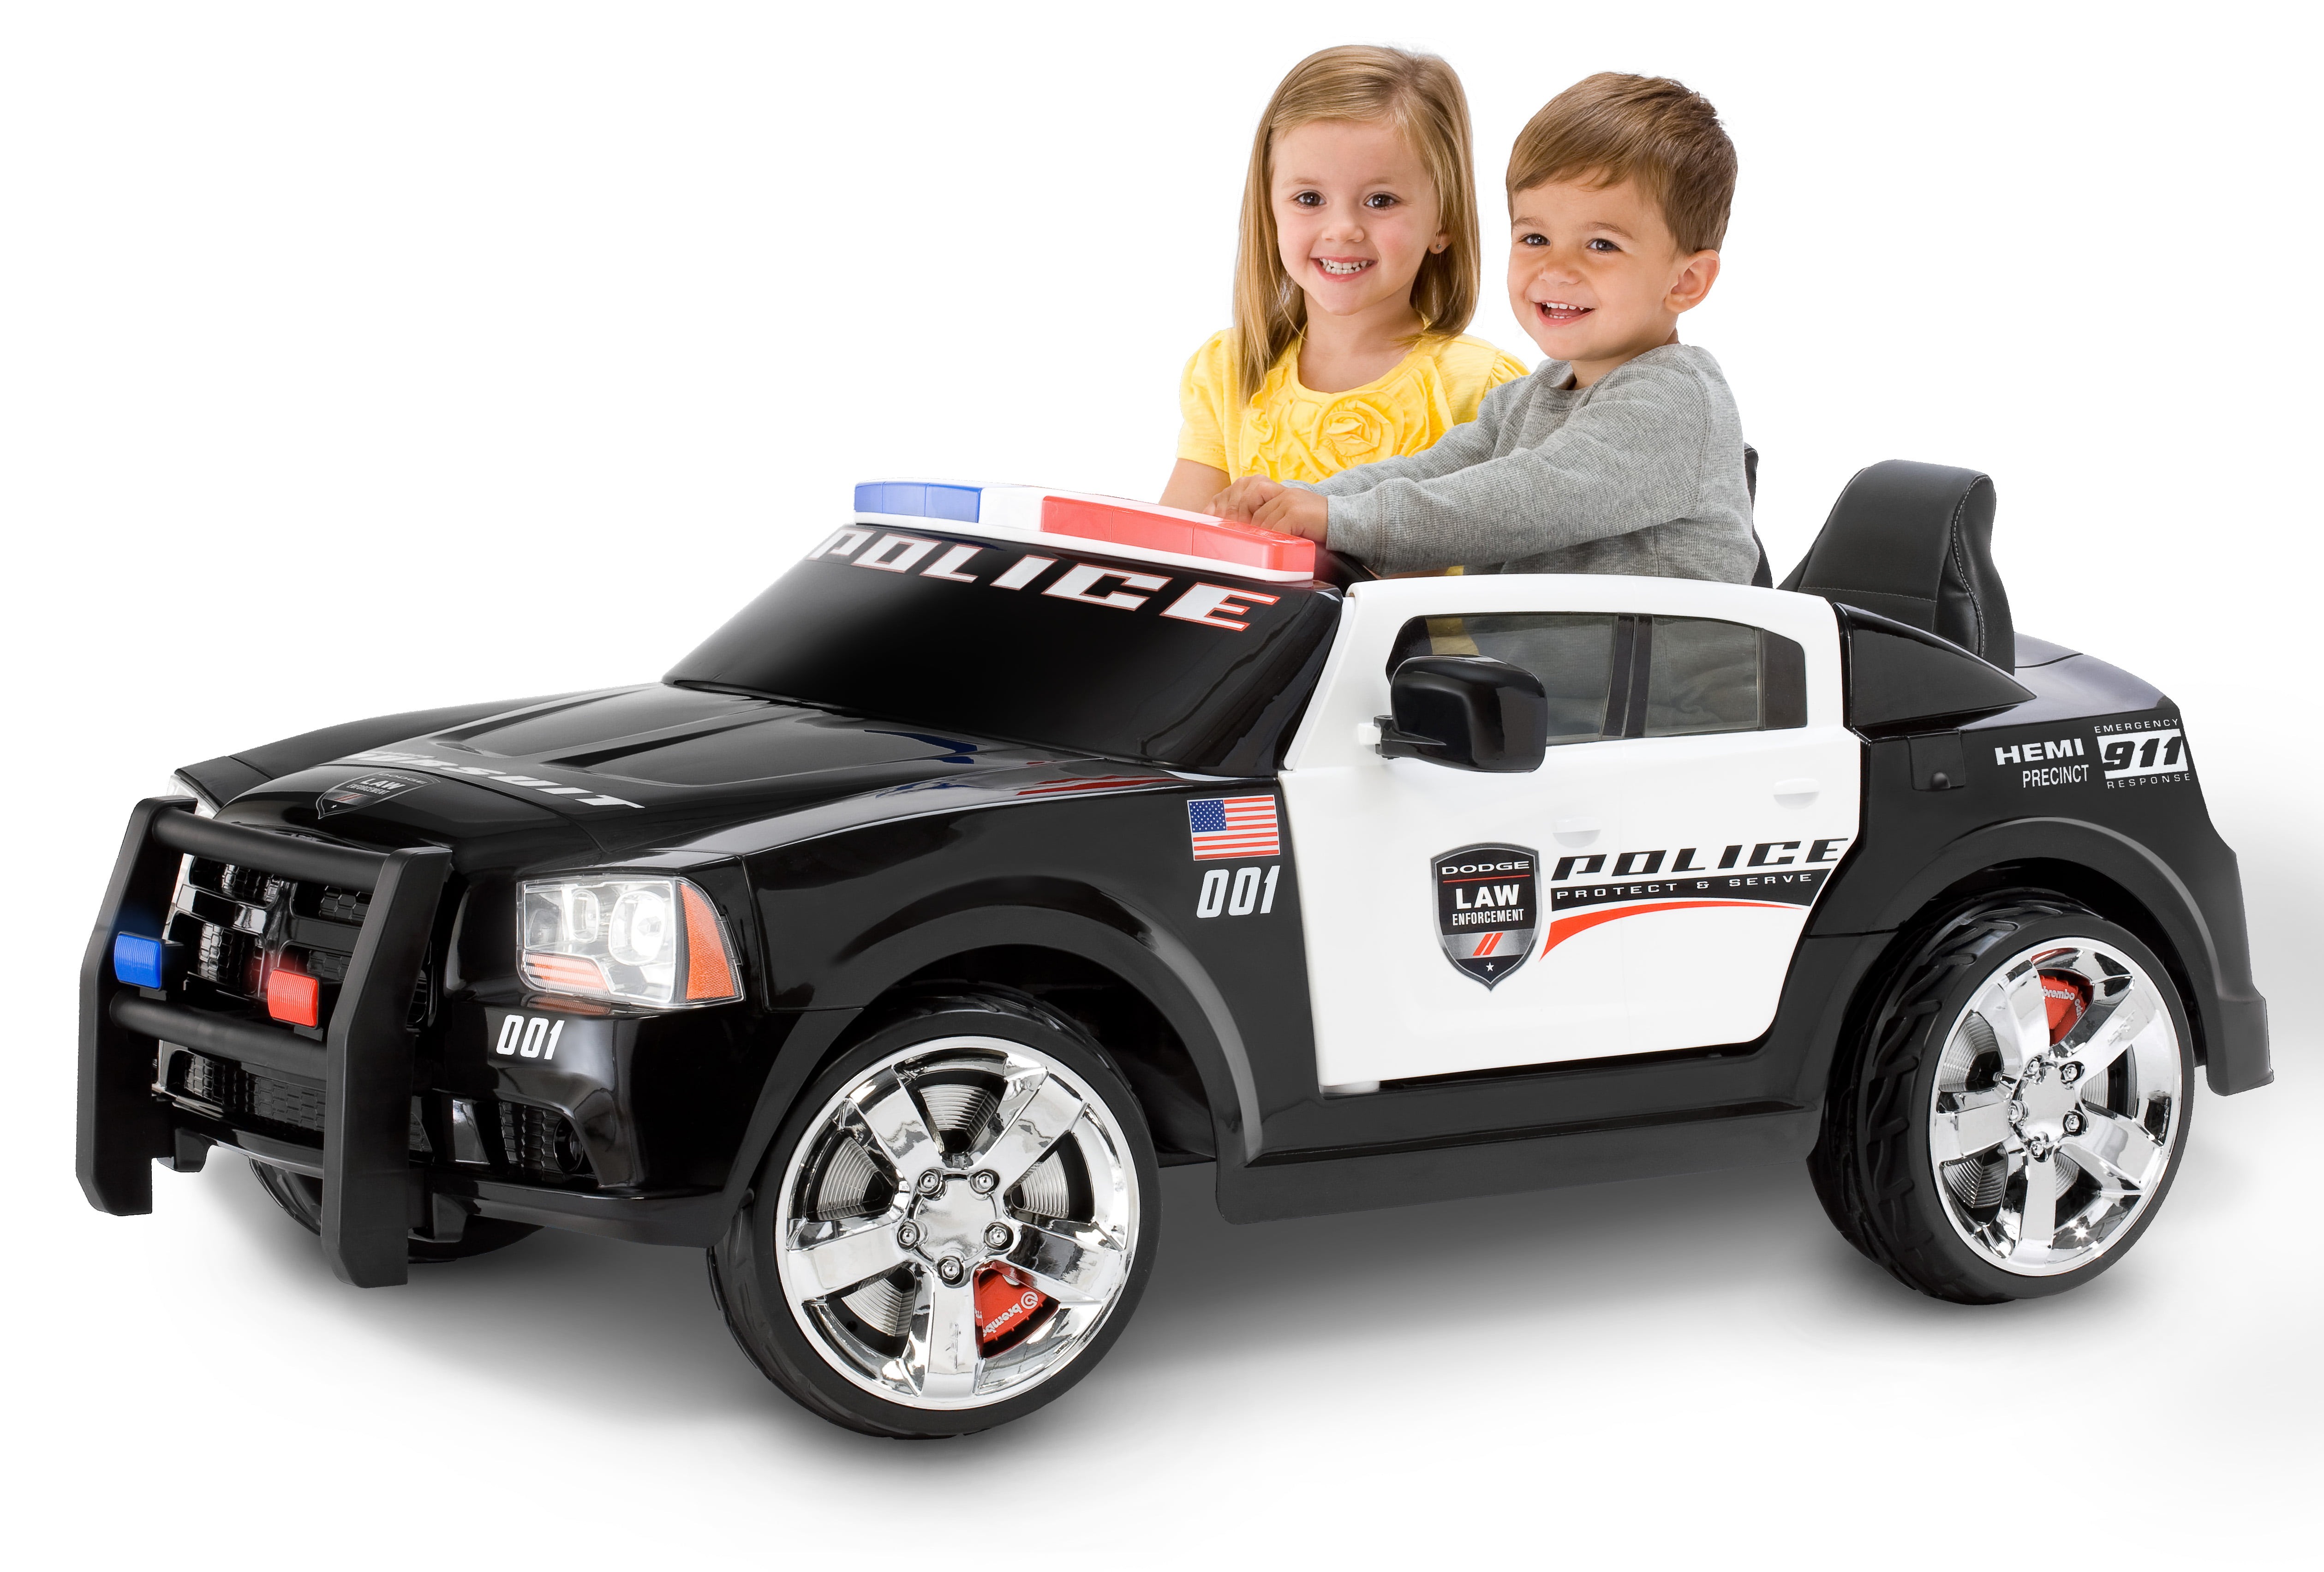 Kid Trax Ride On Police Car Kids Toy Siren Sounds 12 Volt Battery